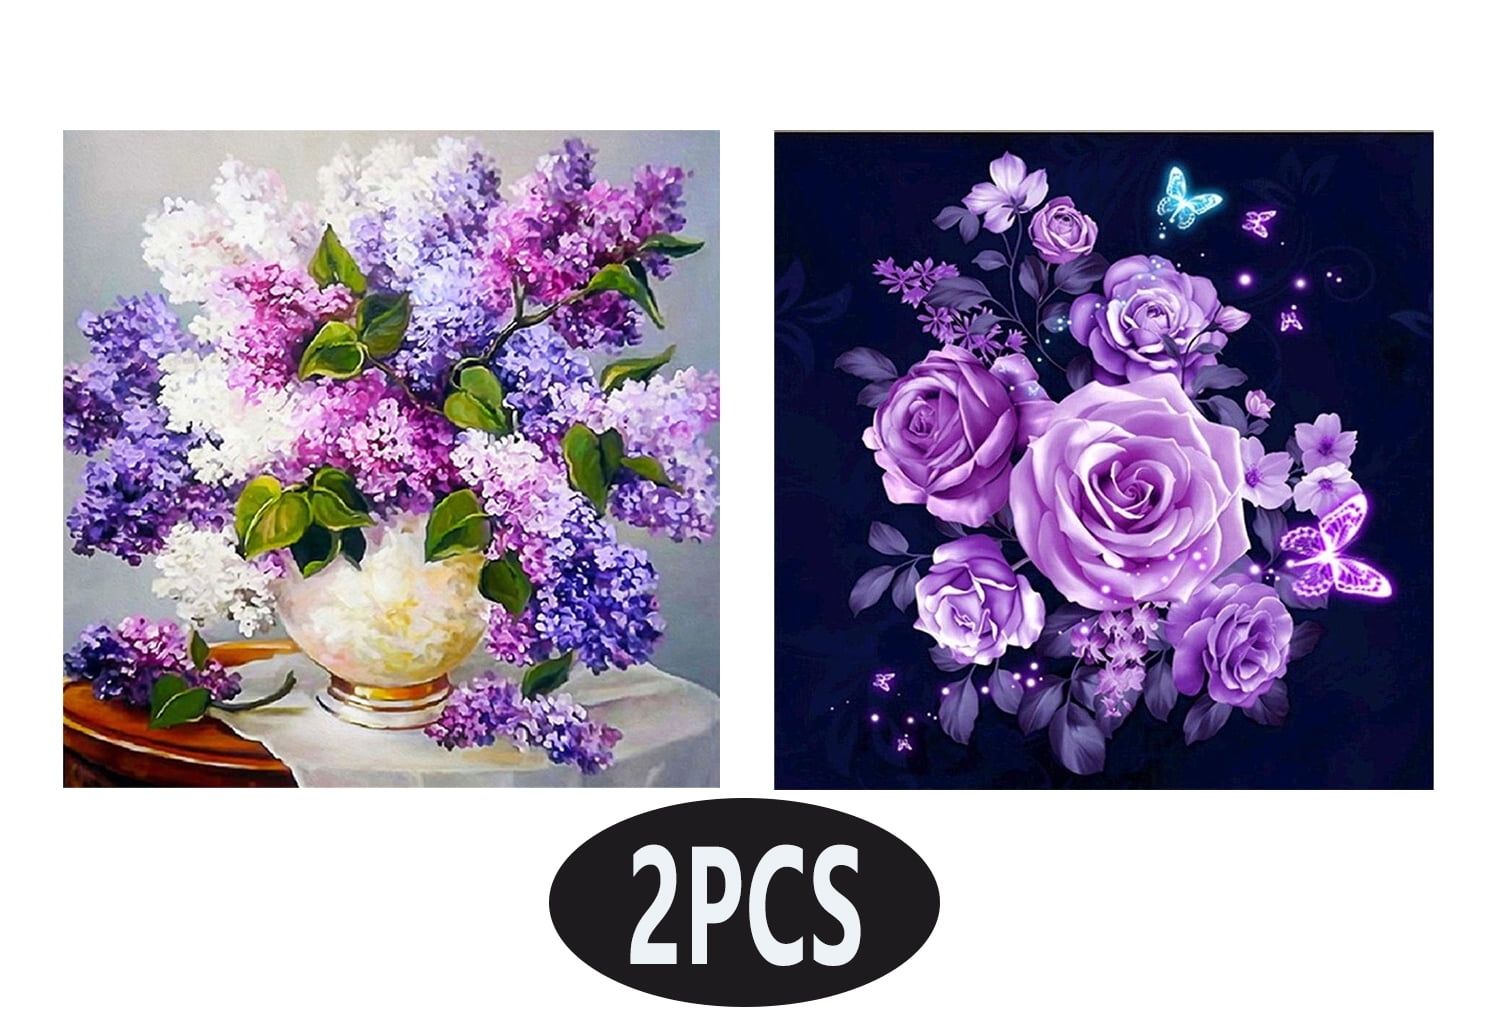 5D Flower RoseDiamond Full Painting Kits, 2 Pcs , Crystal Round DIY Full  Drilled Arts Craft for Home Wall Decor,12x12in(Flower) 